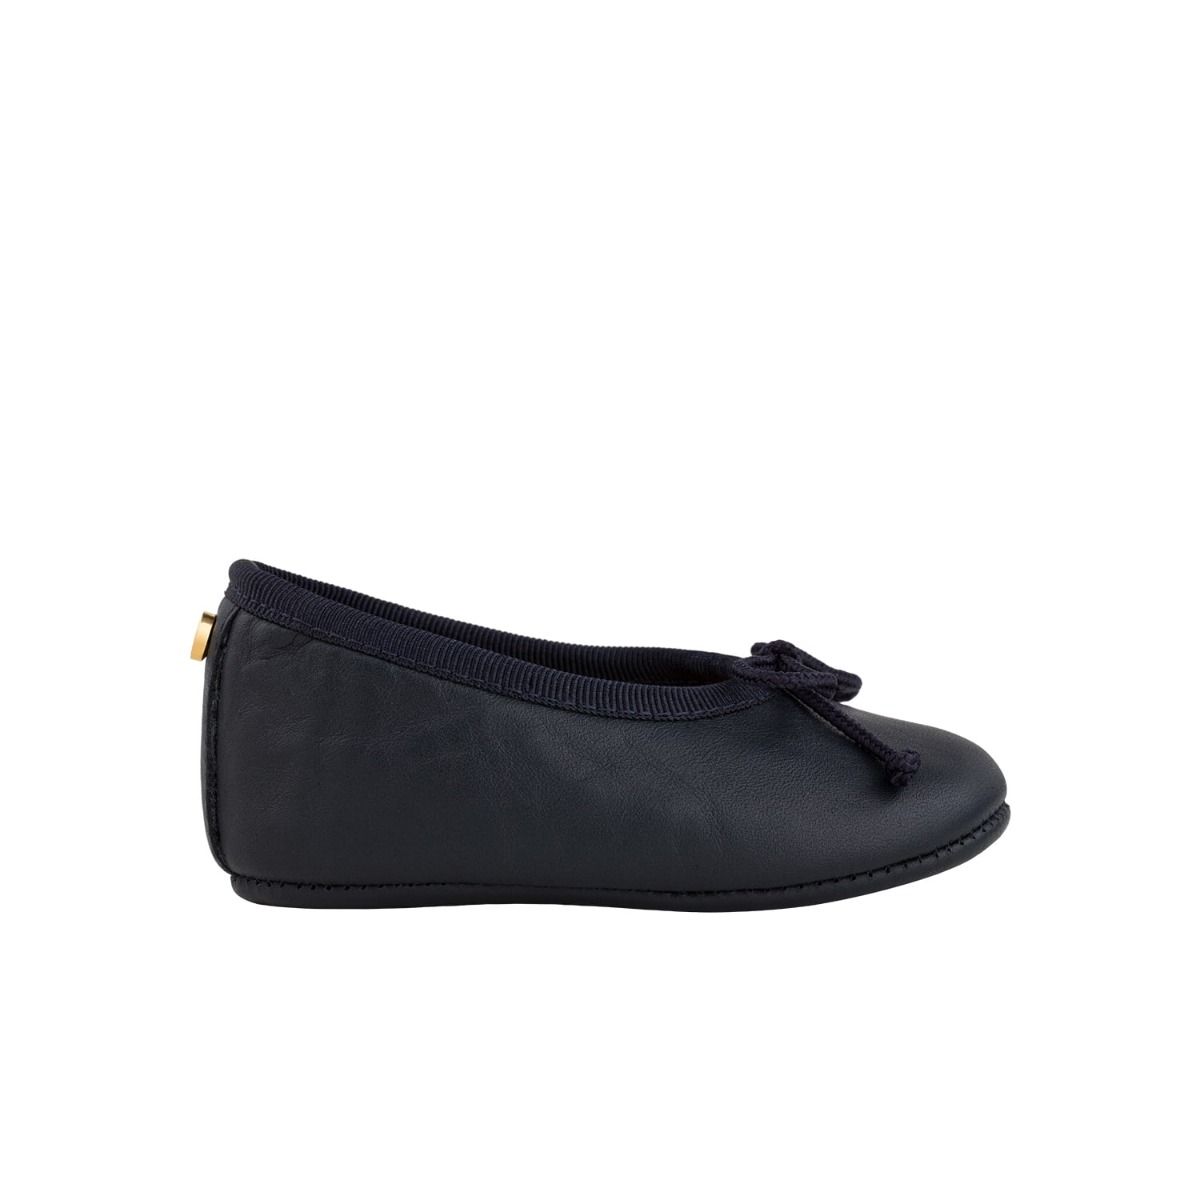 Baby ballet flats in navy blue leather with bow detail in cord.